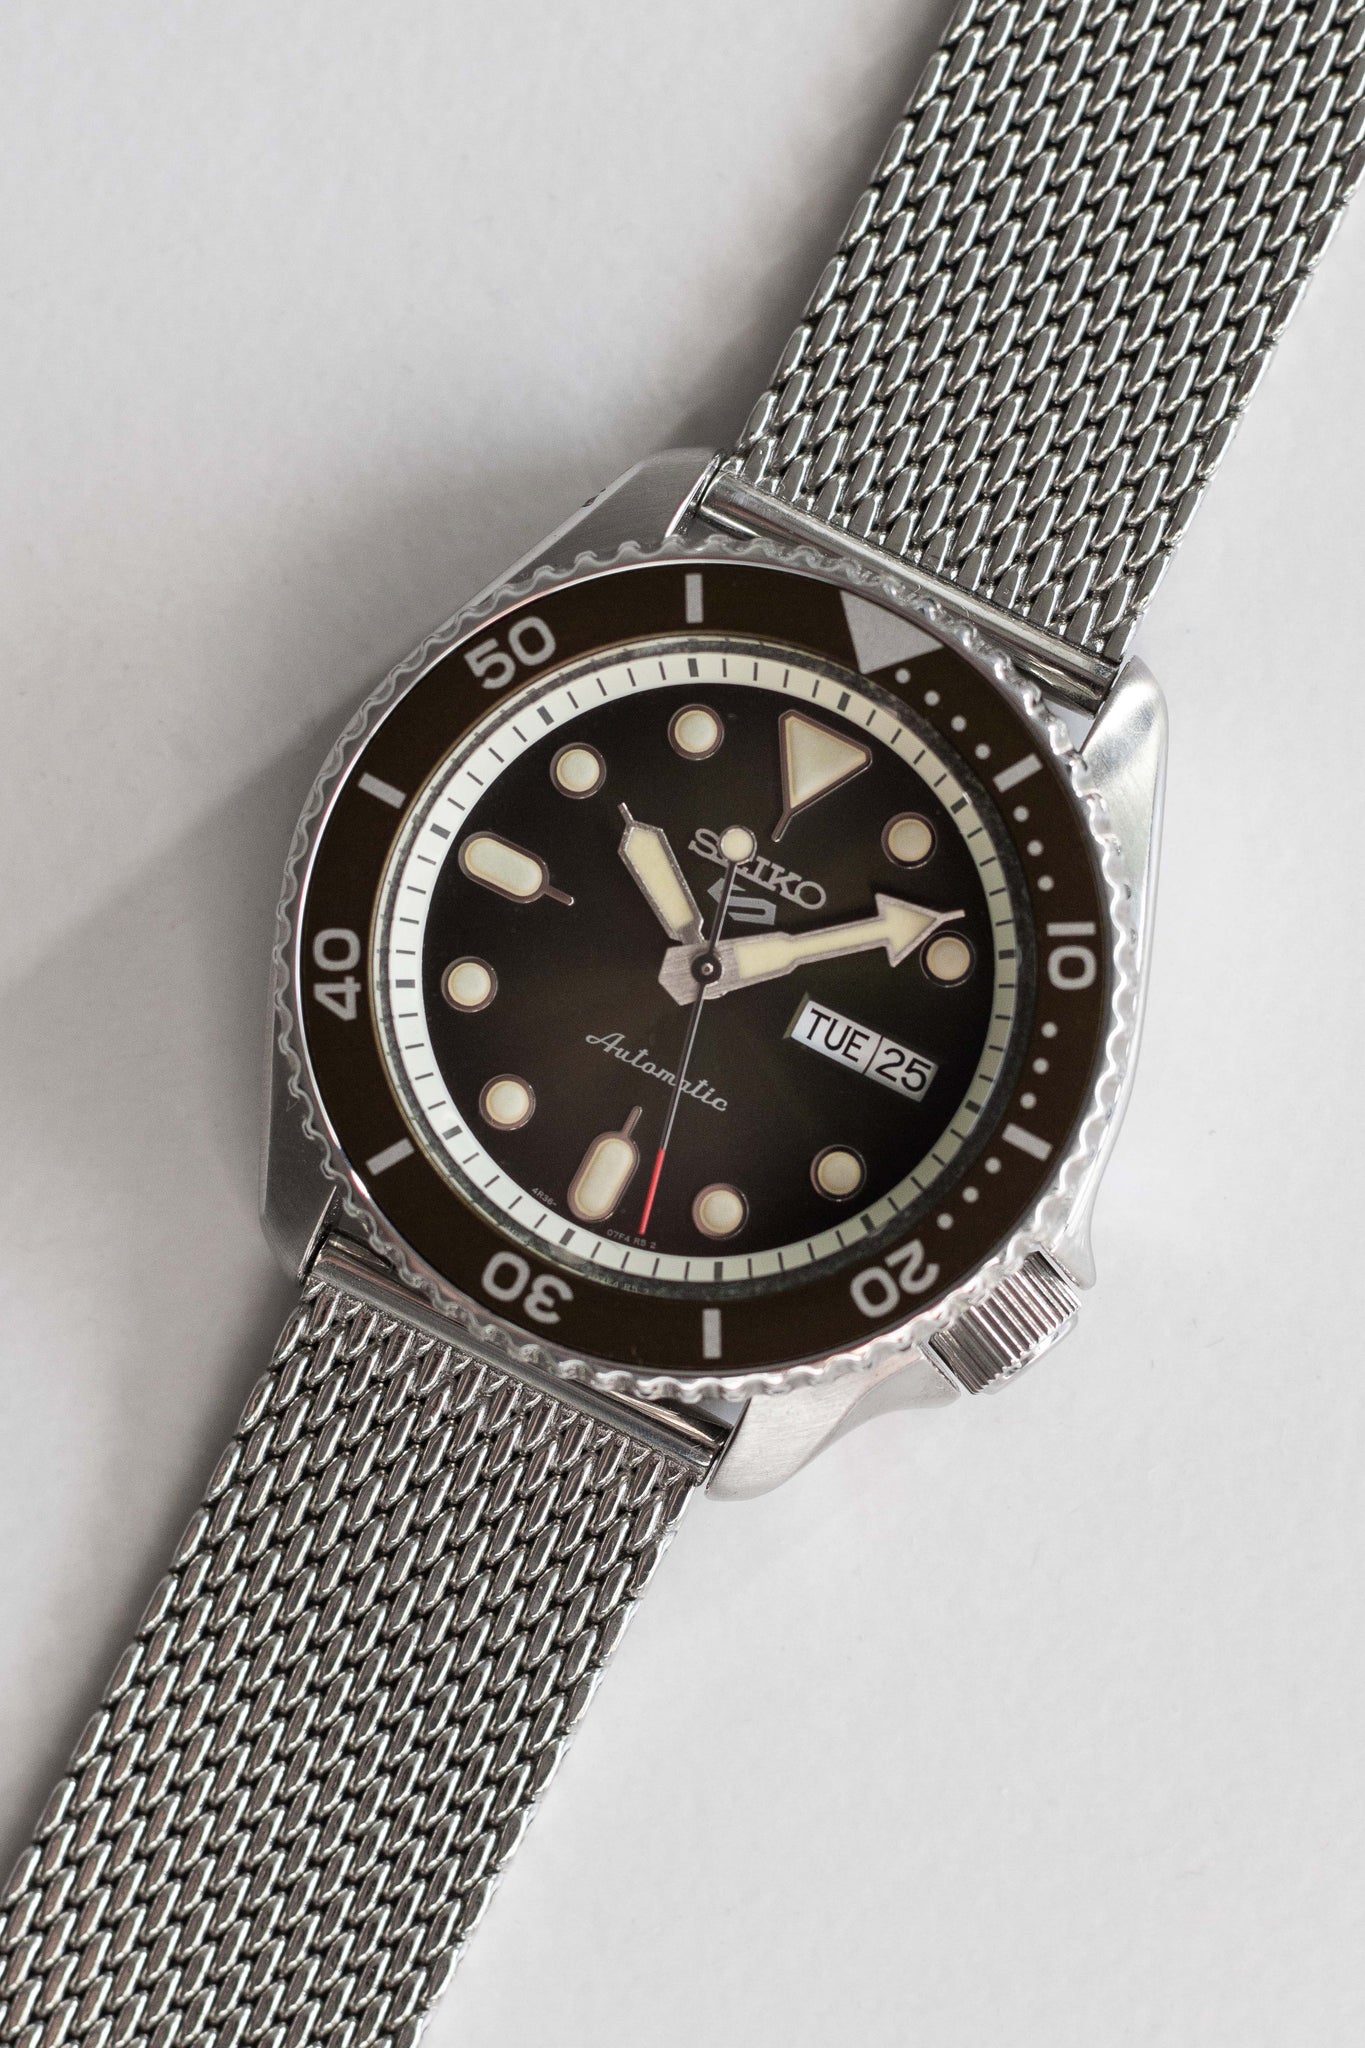 Seiko 5 Sports Diver Ref. SRPD75K1 2019 w/ Box & Papers